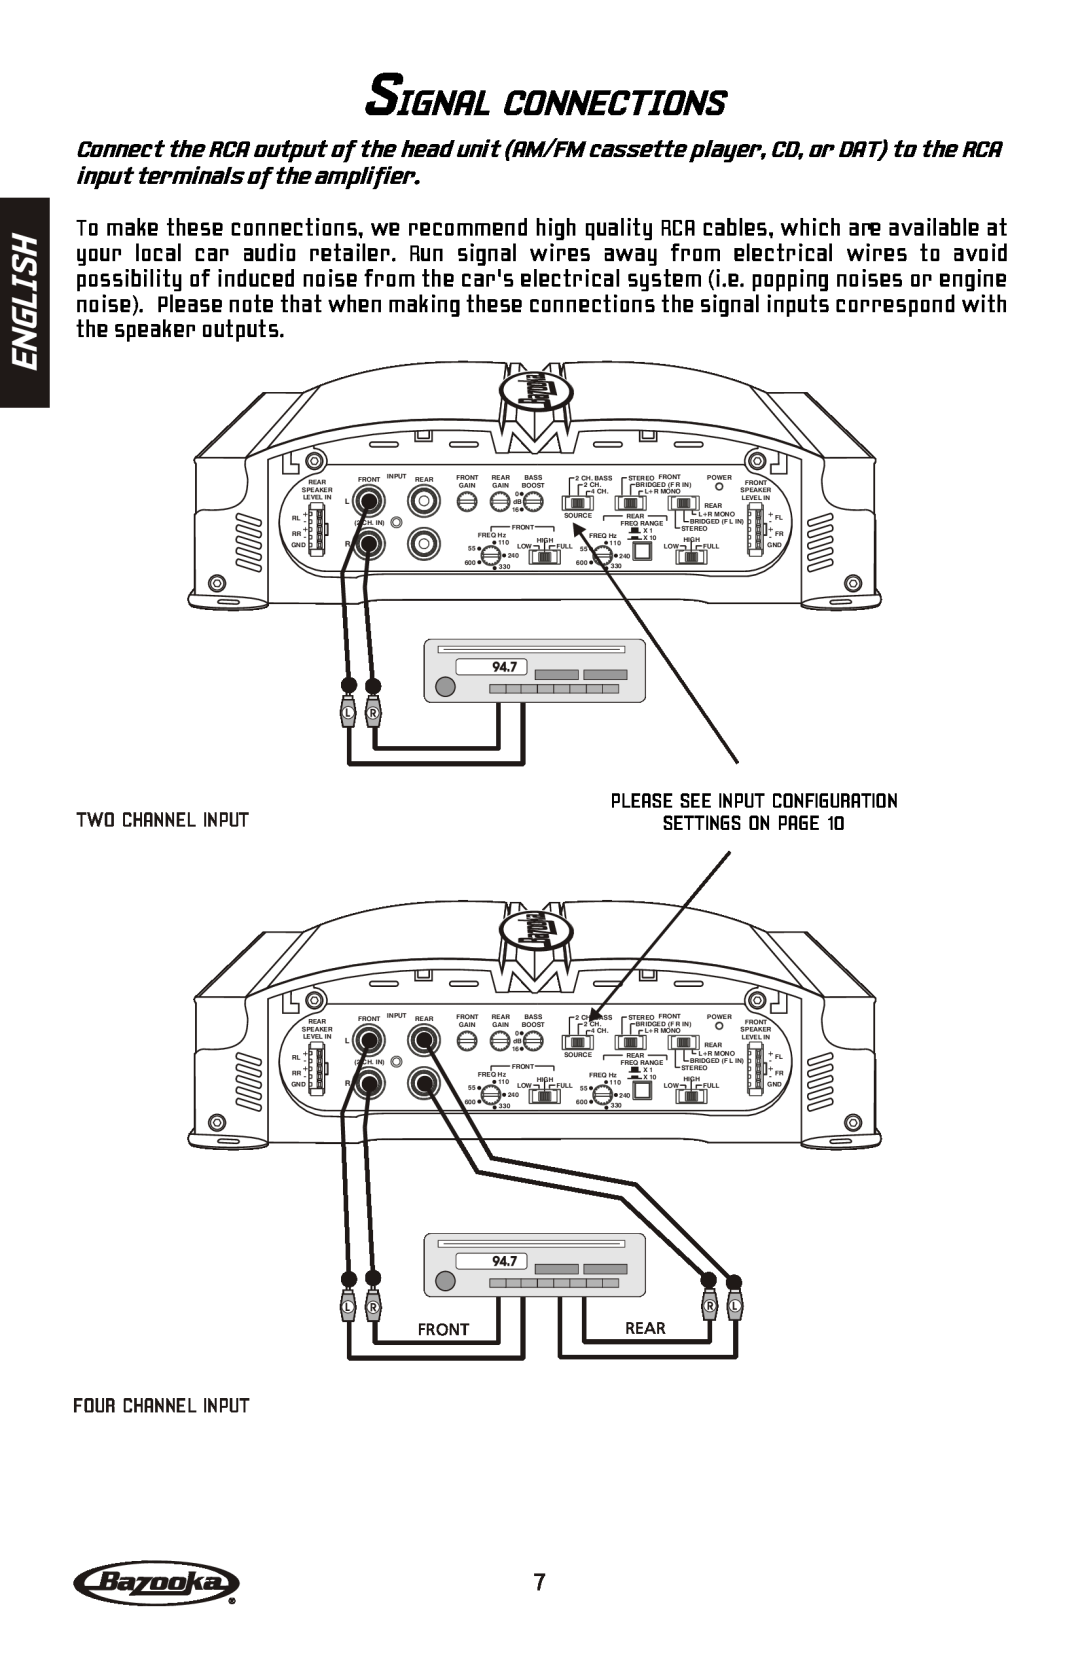 Bazooka MGA4150 manual Signal Connections, English, Two Channel Input, Four Channel Input 